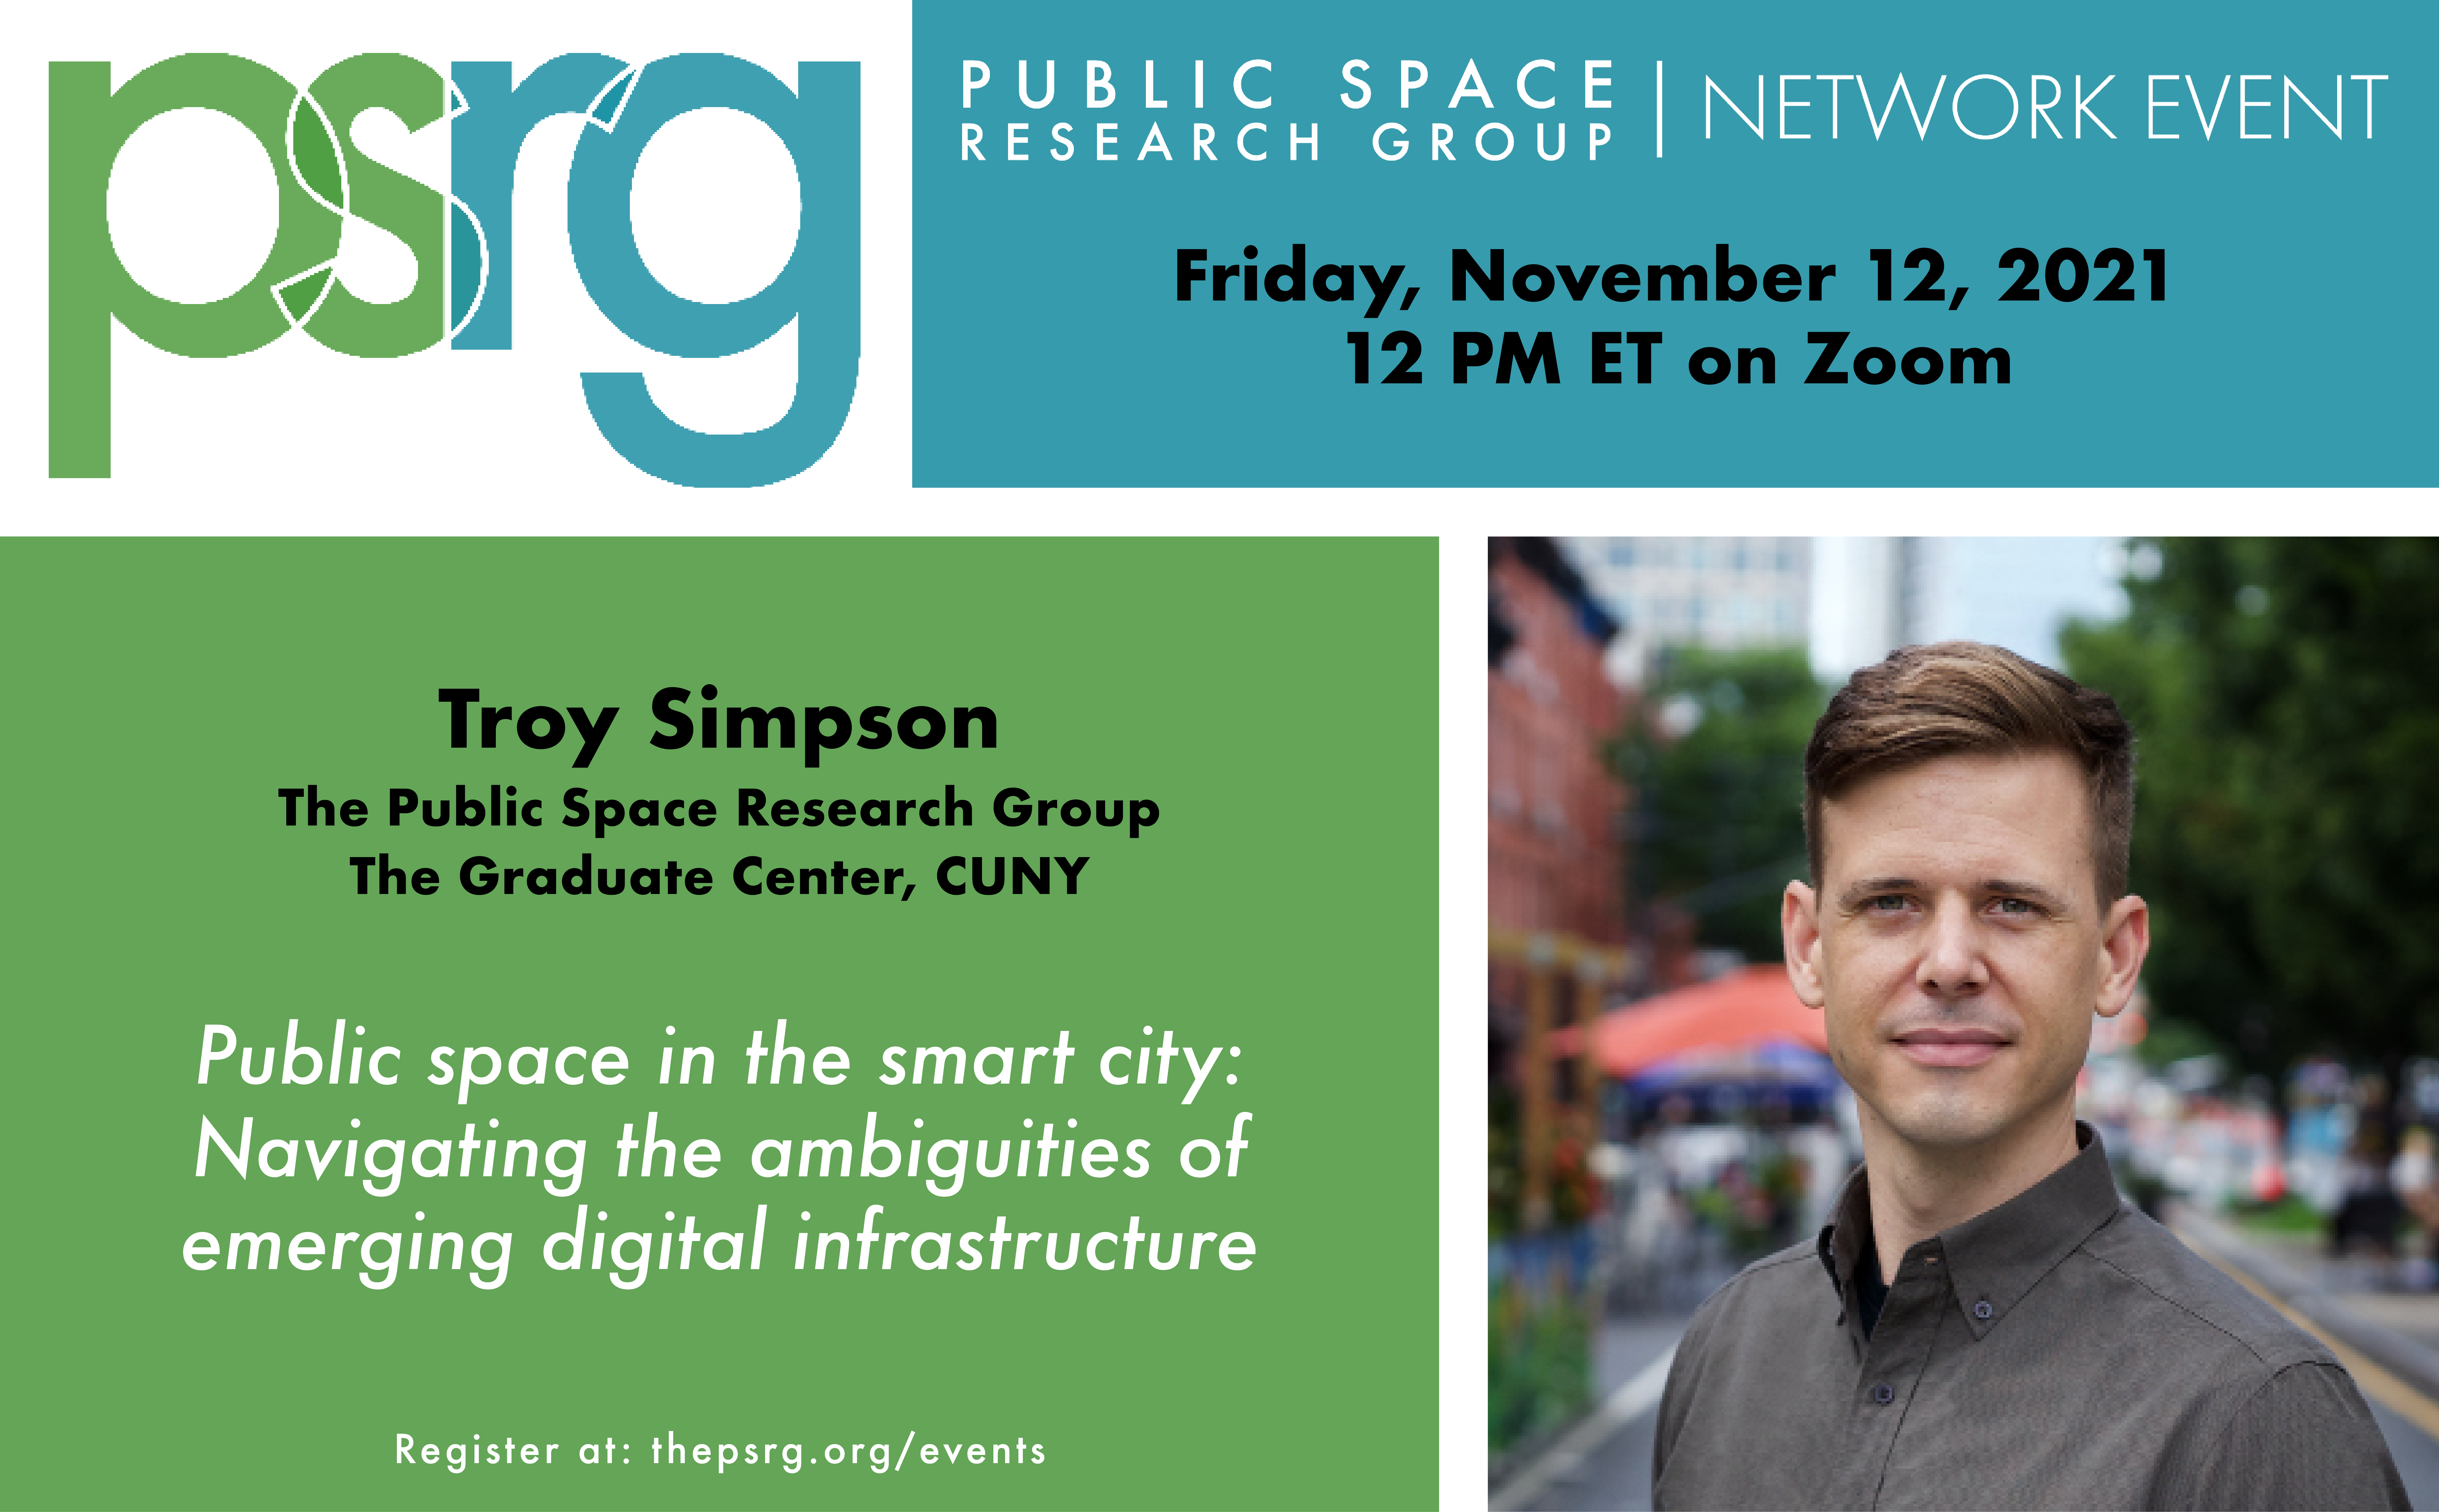 NOVEMBER 12 @12 ET :: Troy Simpson presents: Public space in the smart city: Navigating the ambiguities of emerging digital infrastructure